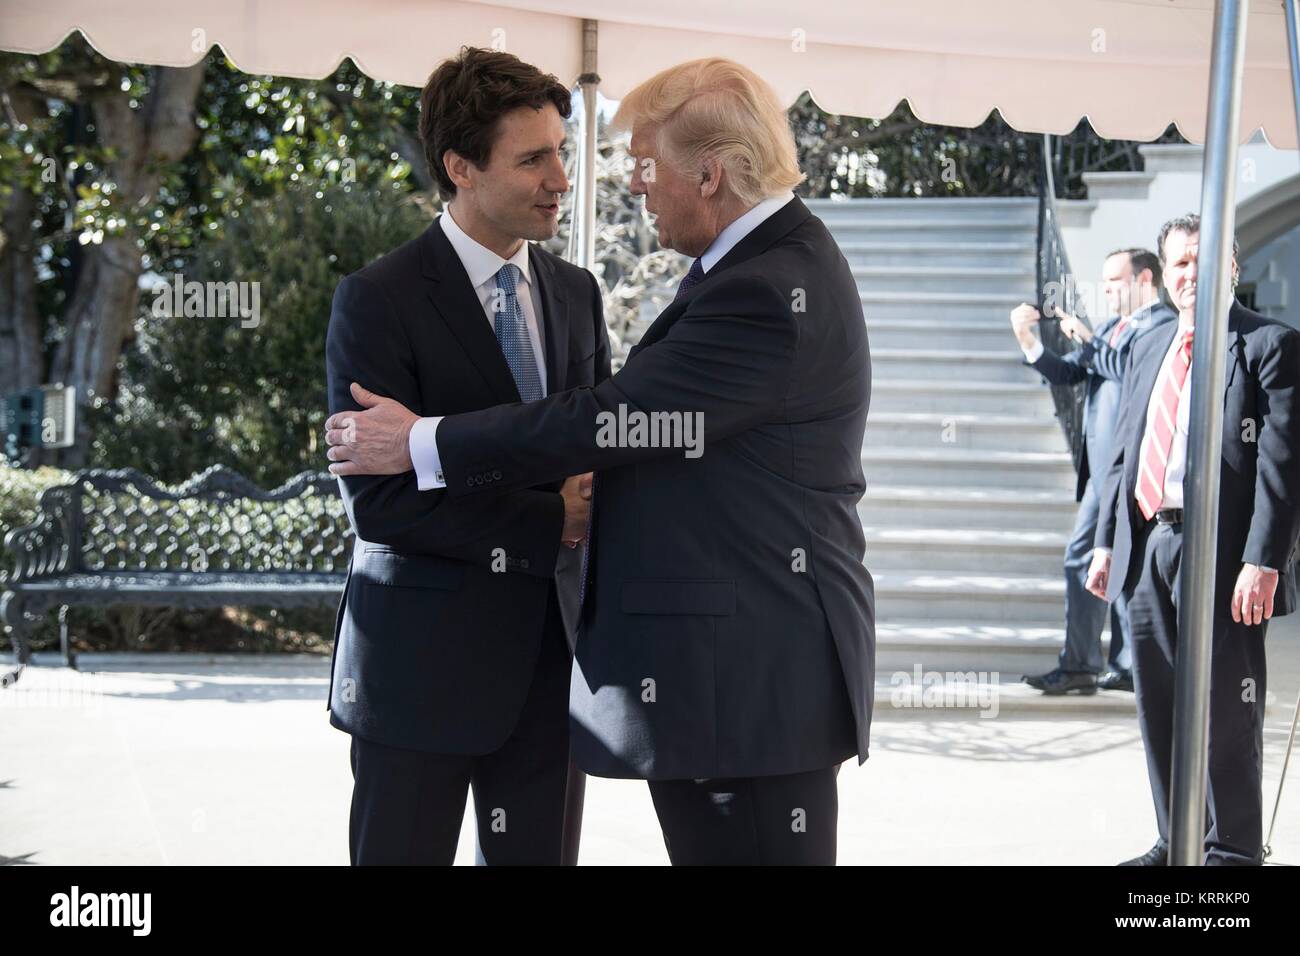 Canadian Prime Minister Justin Trudeau (left) greets U.S. President Donald Trump at the White House South Portico February 13, 2017 in Washington, DC. Stock Photo